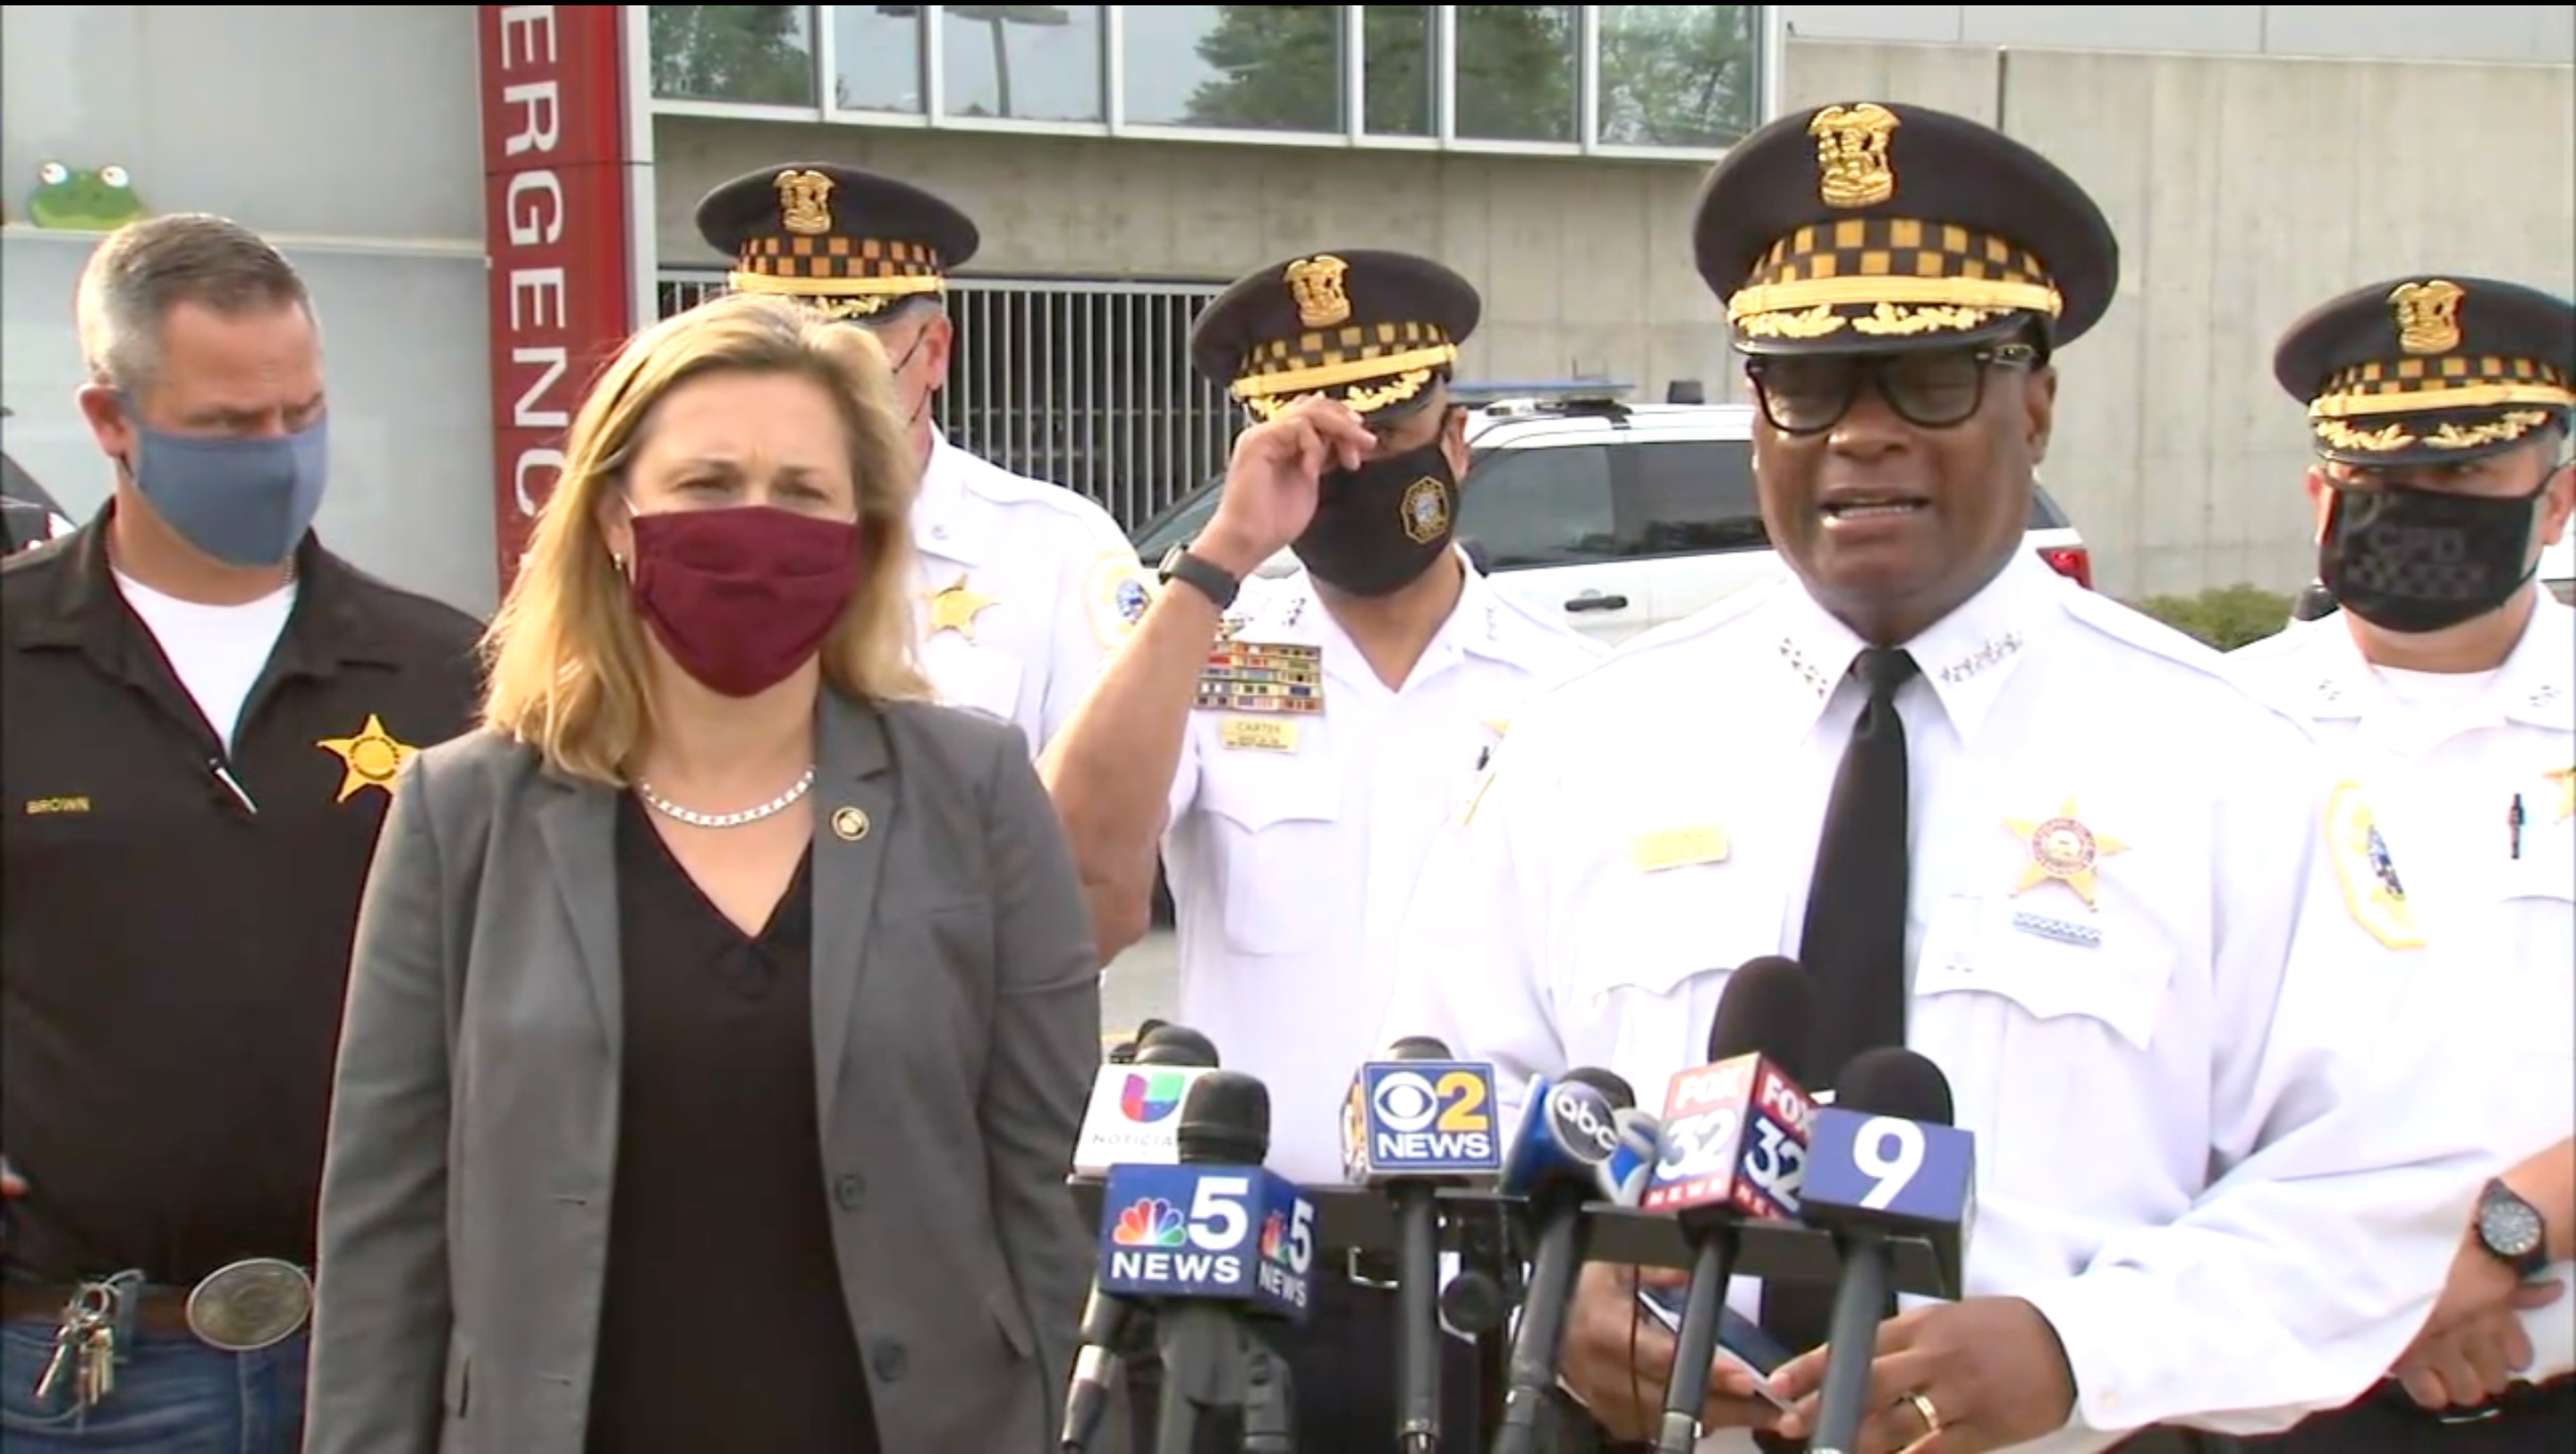 Superintendent of Chicago Police Department gave a press conference this morning about the shooting